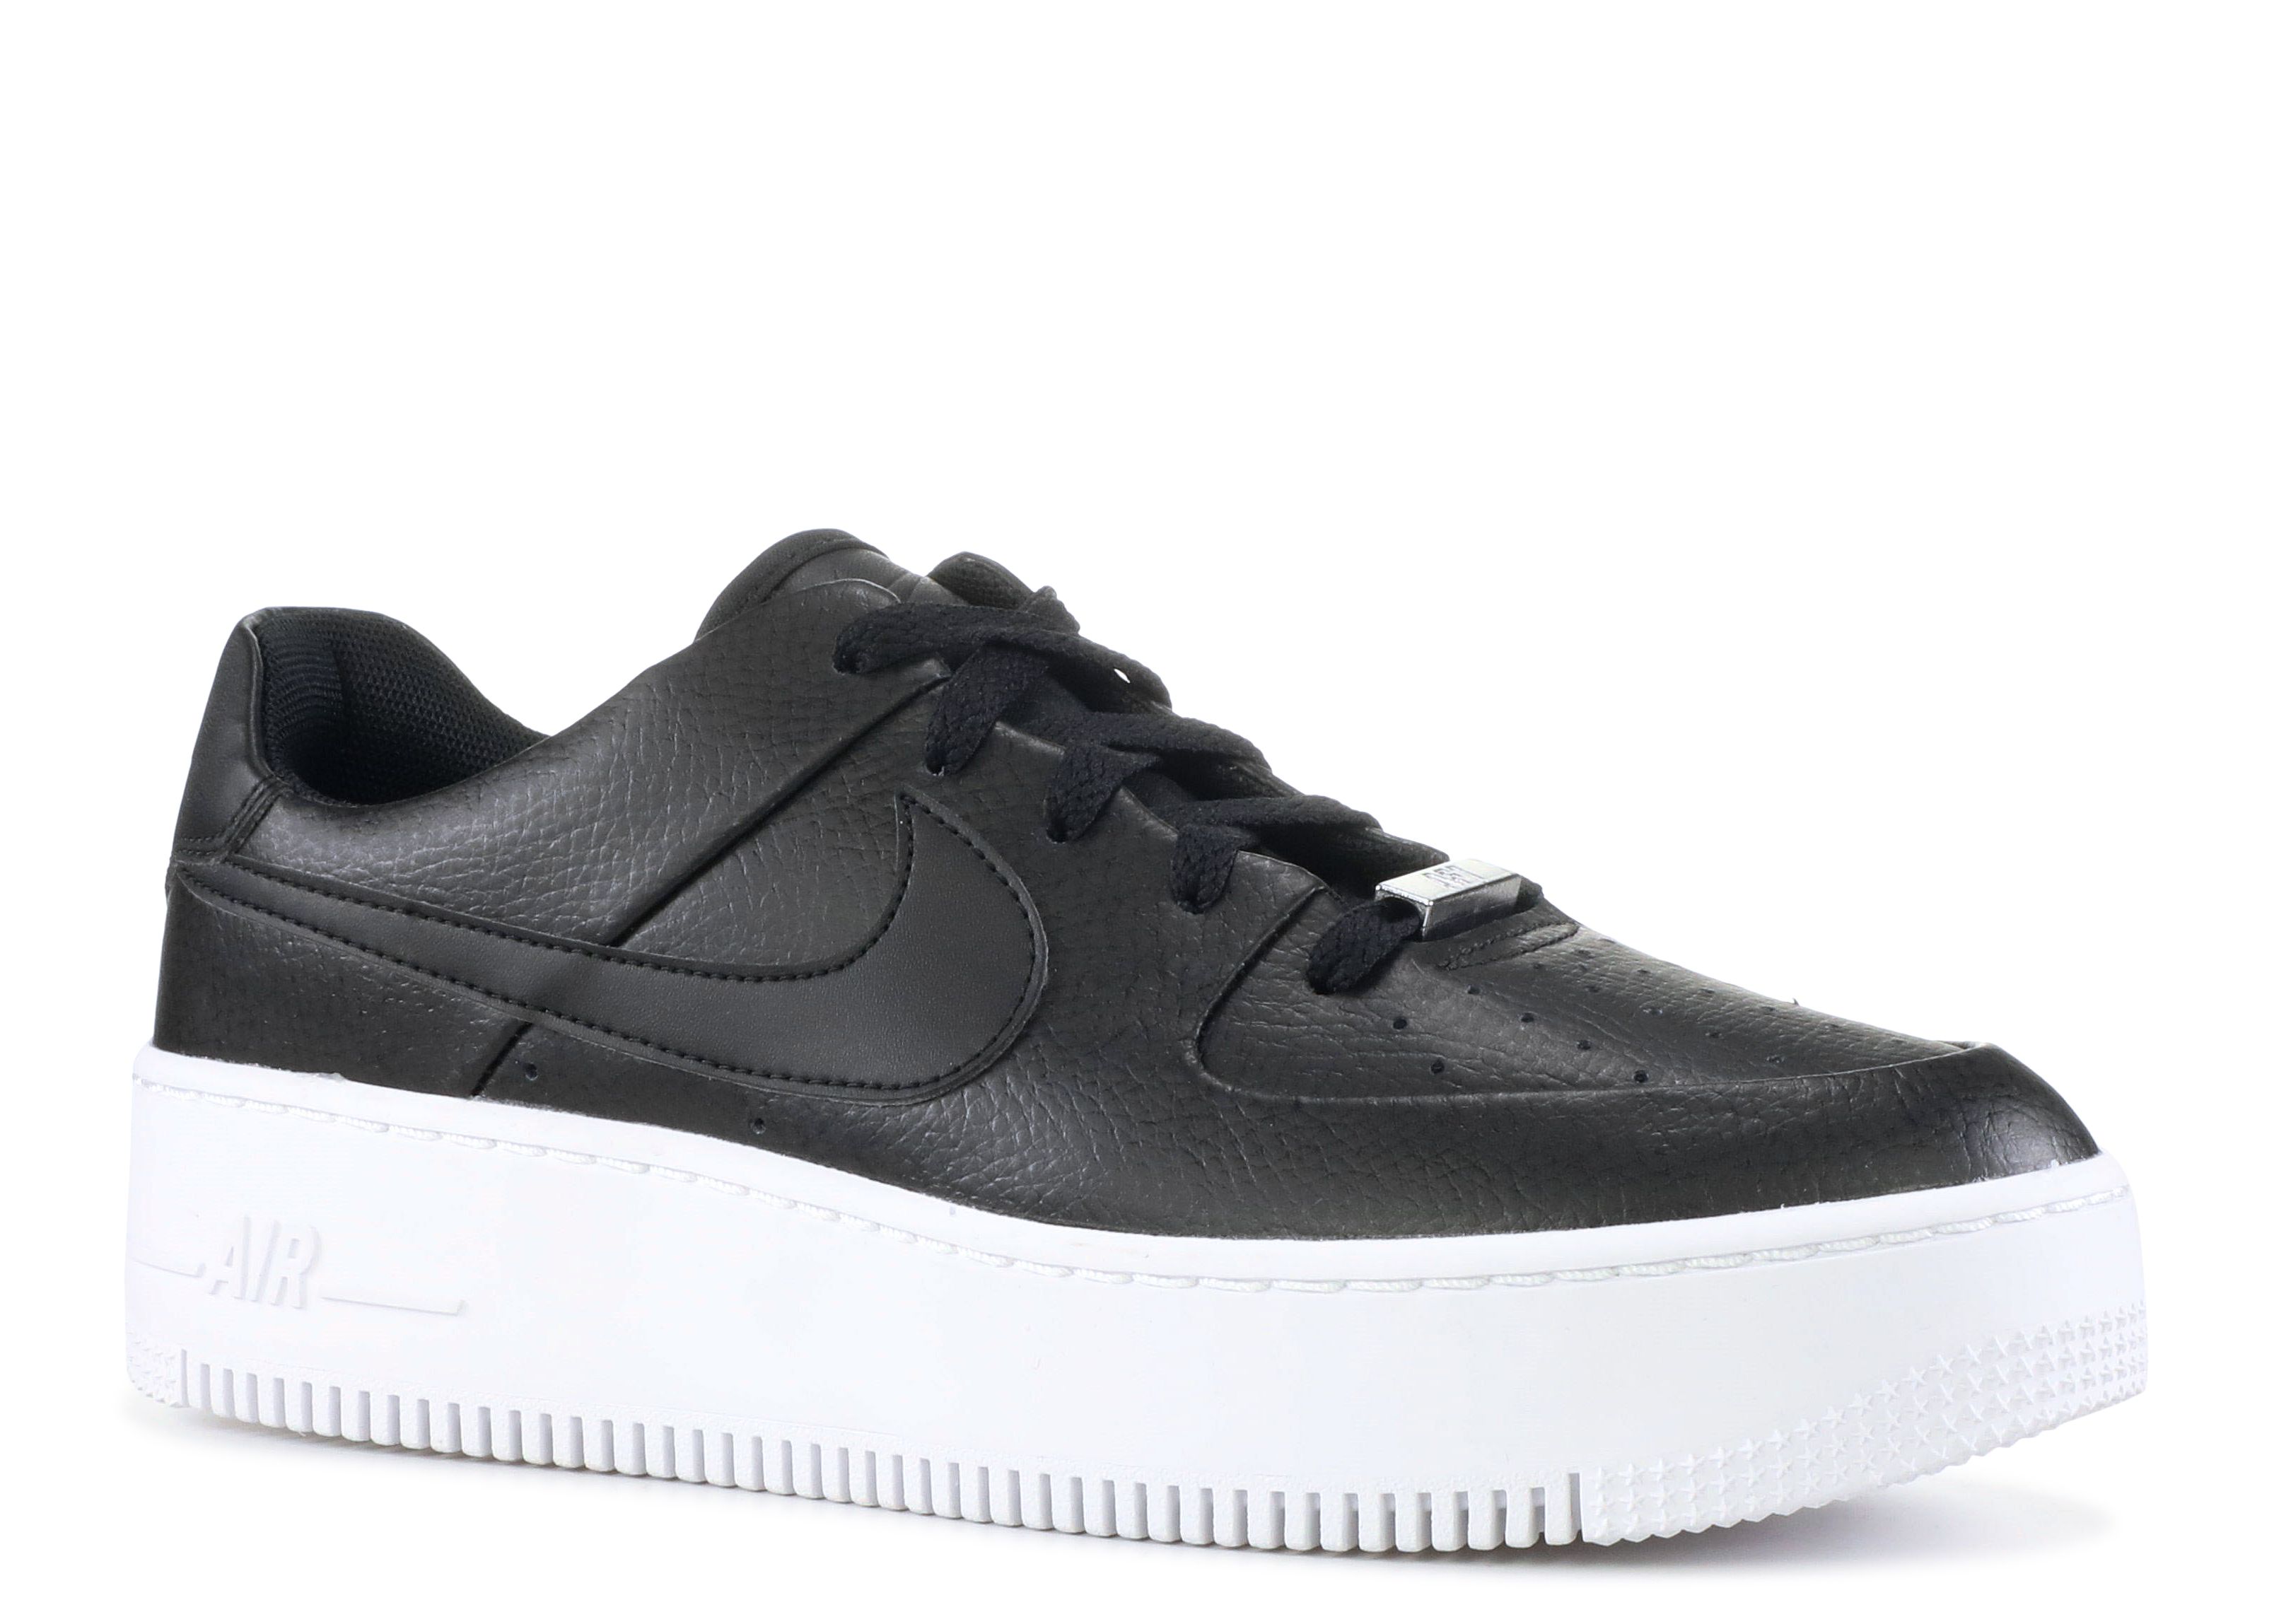 Nike Dresses This Air Force 1 Low LV8 J22 In White Black - Sneaker